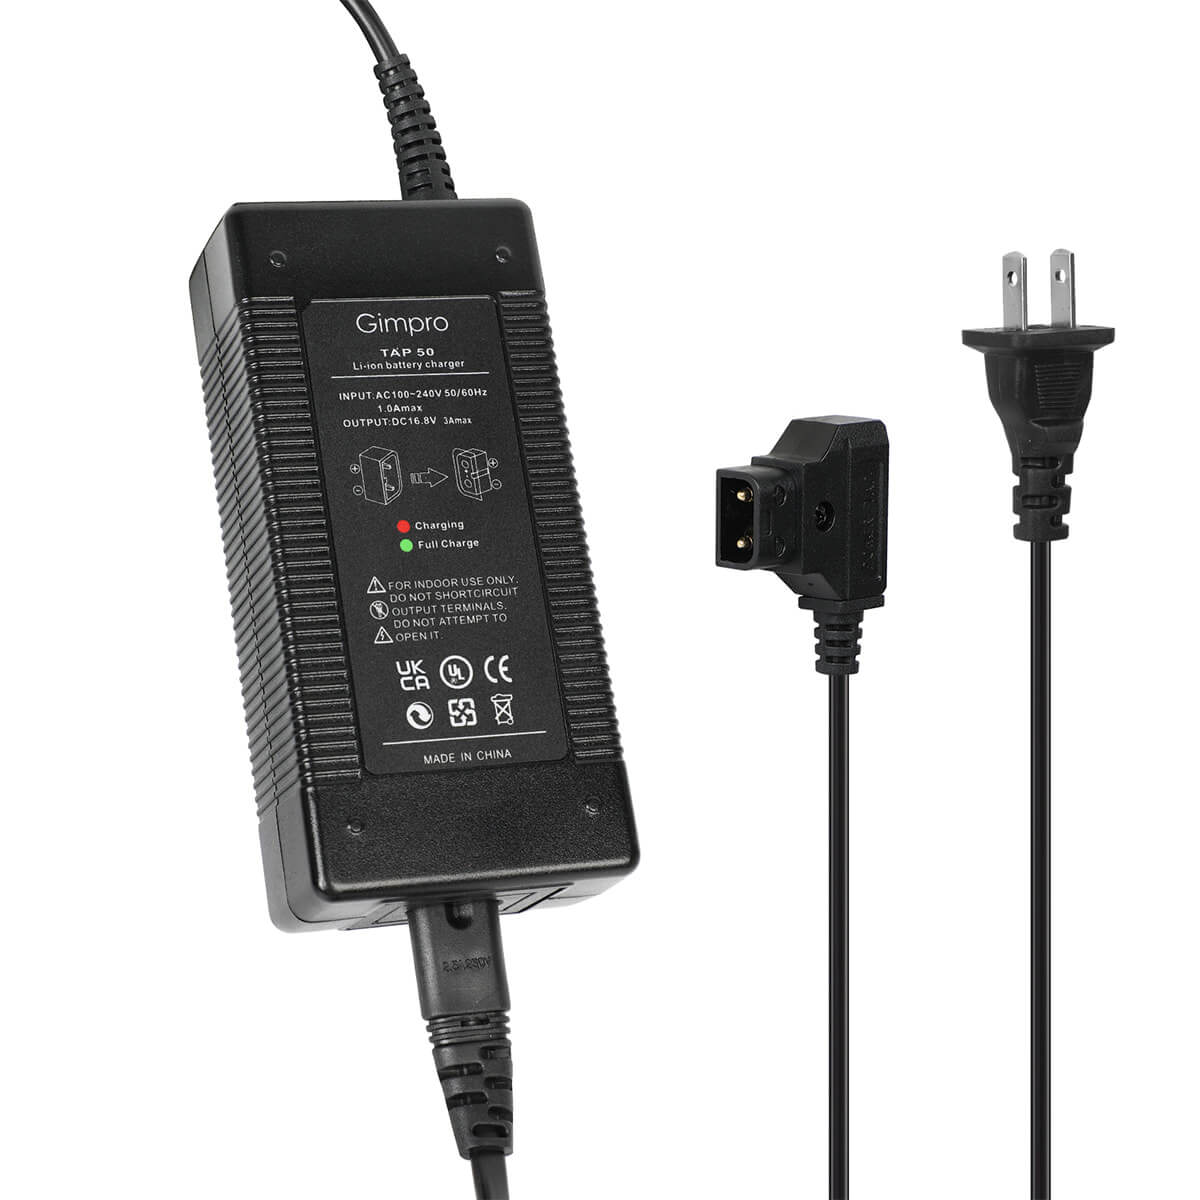 Gimpro Tap50 d tap charger is for sale at the Moman store, offering 4 plug types of UK, EU, US, and JP, meeting different requirements.